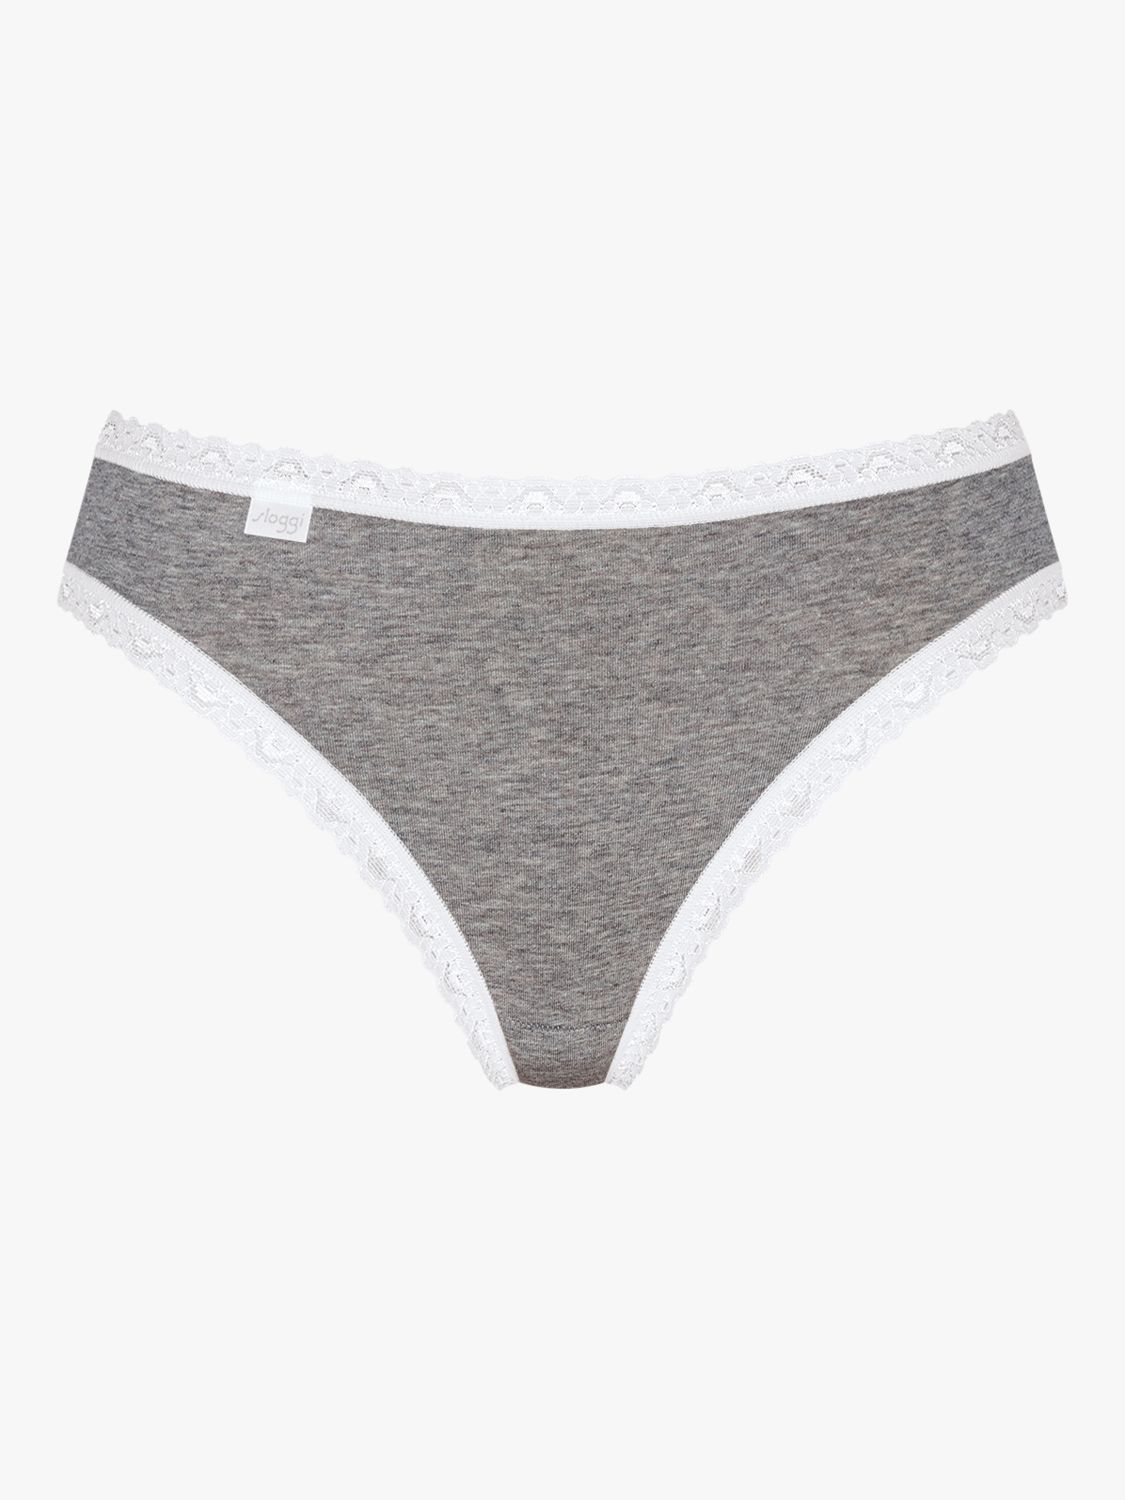 sloggi 24/7 Weekend Tai Knickers, Pack of 3, White - Light Combination ...